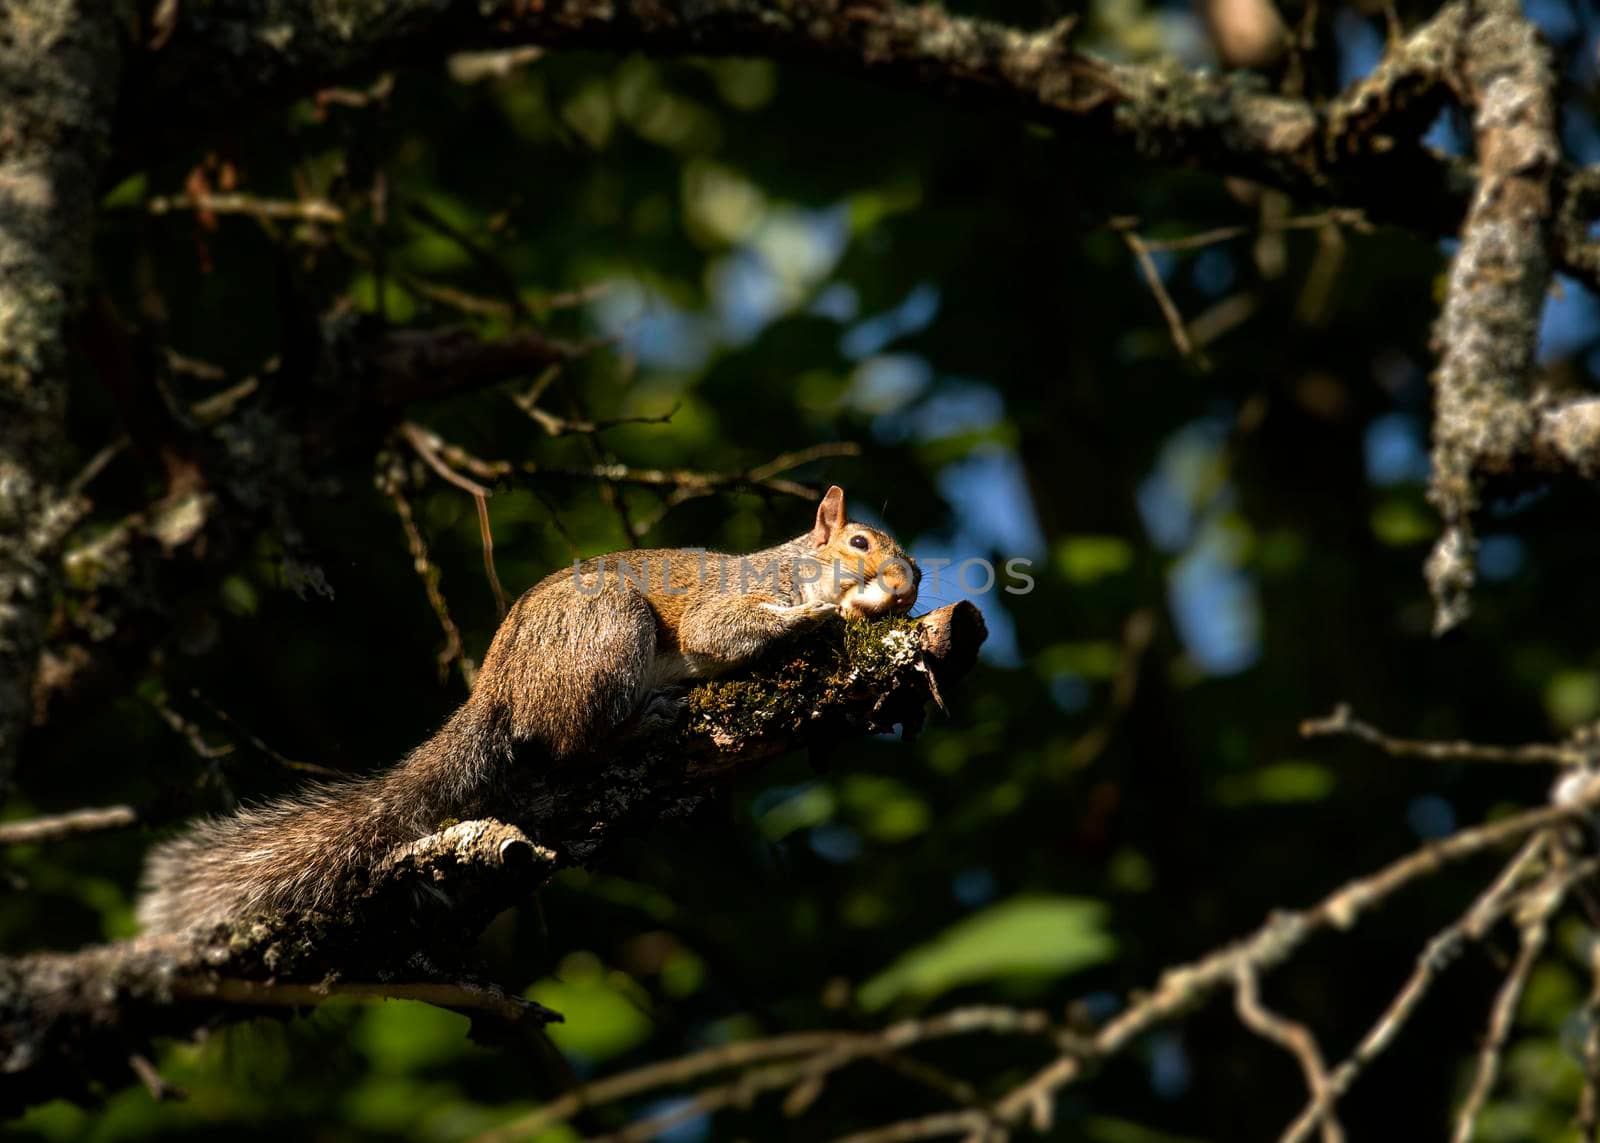 A gray squirrel is stretched put on an apple tree limb sunning itself.